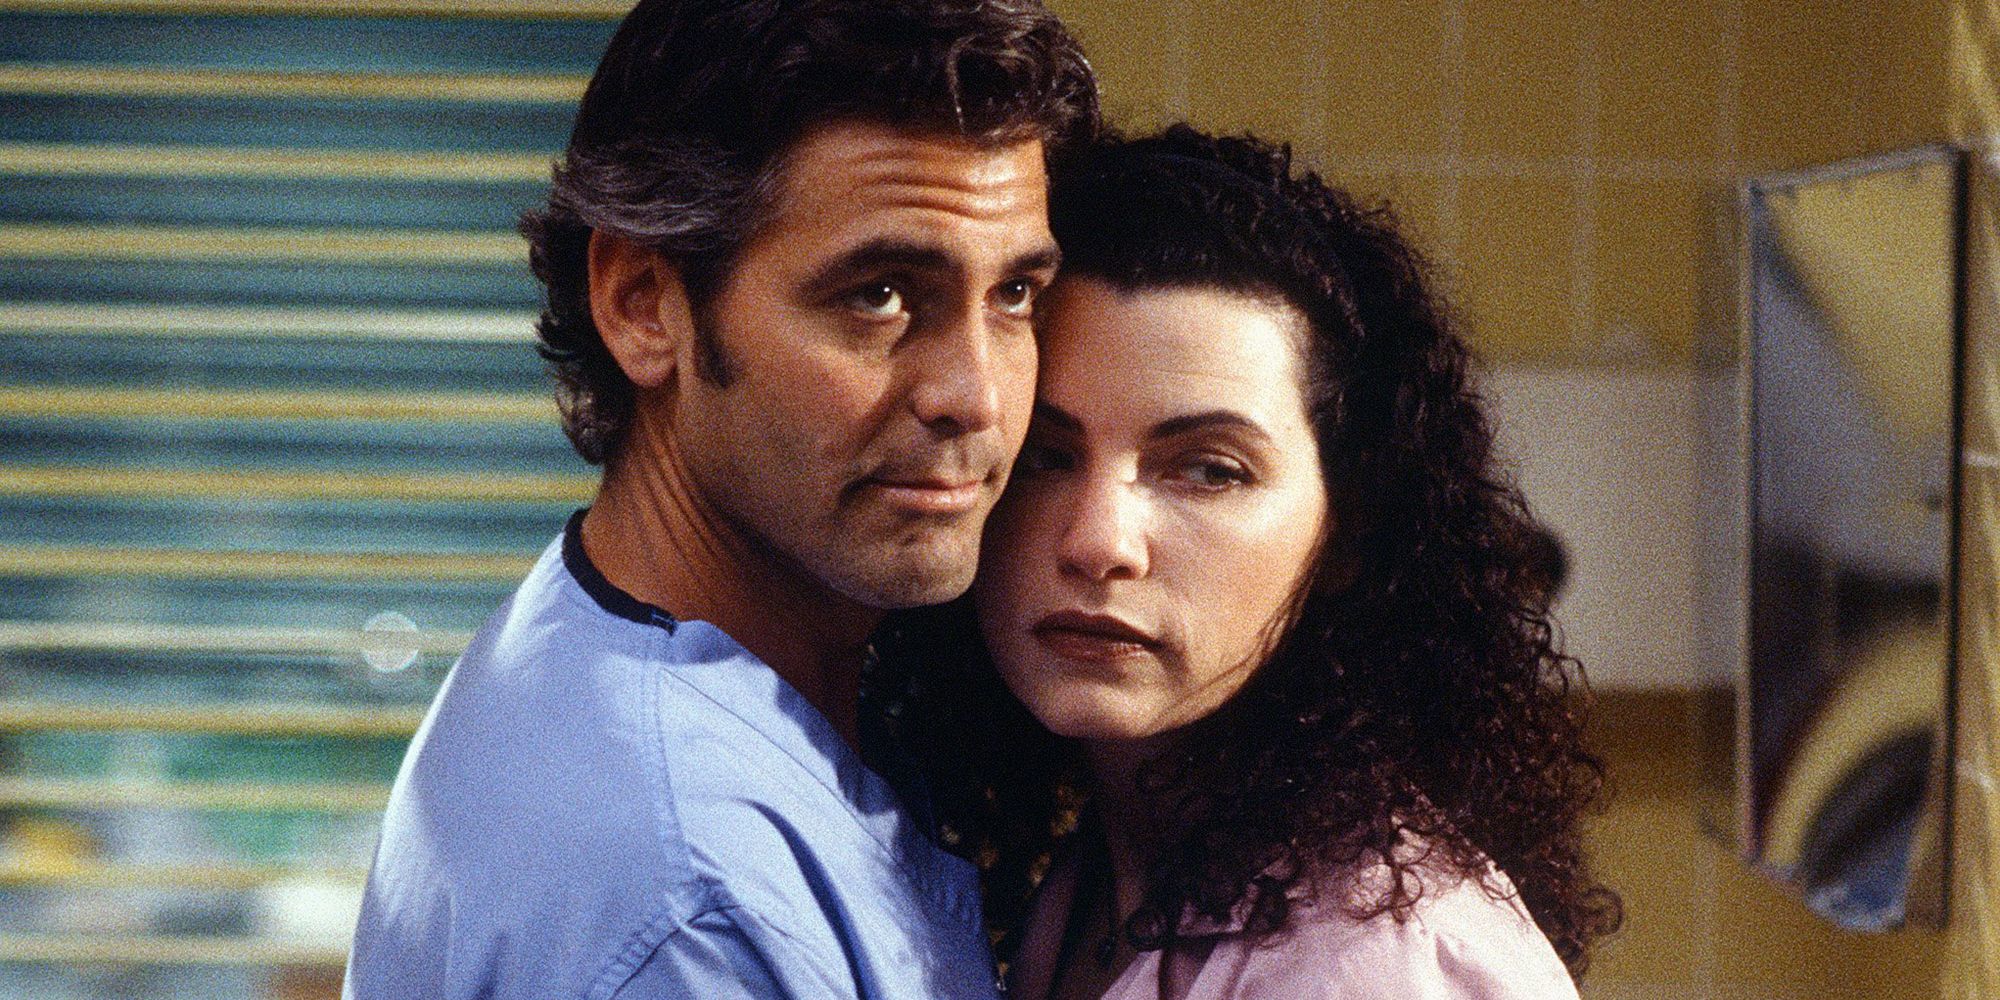 Killing off Carol Hathaway (Julianna Margulies) in the pilot episode did not go down well with test audiences